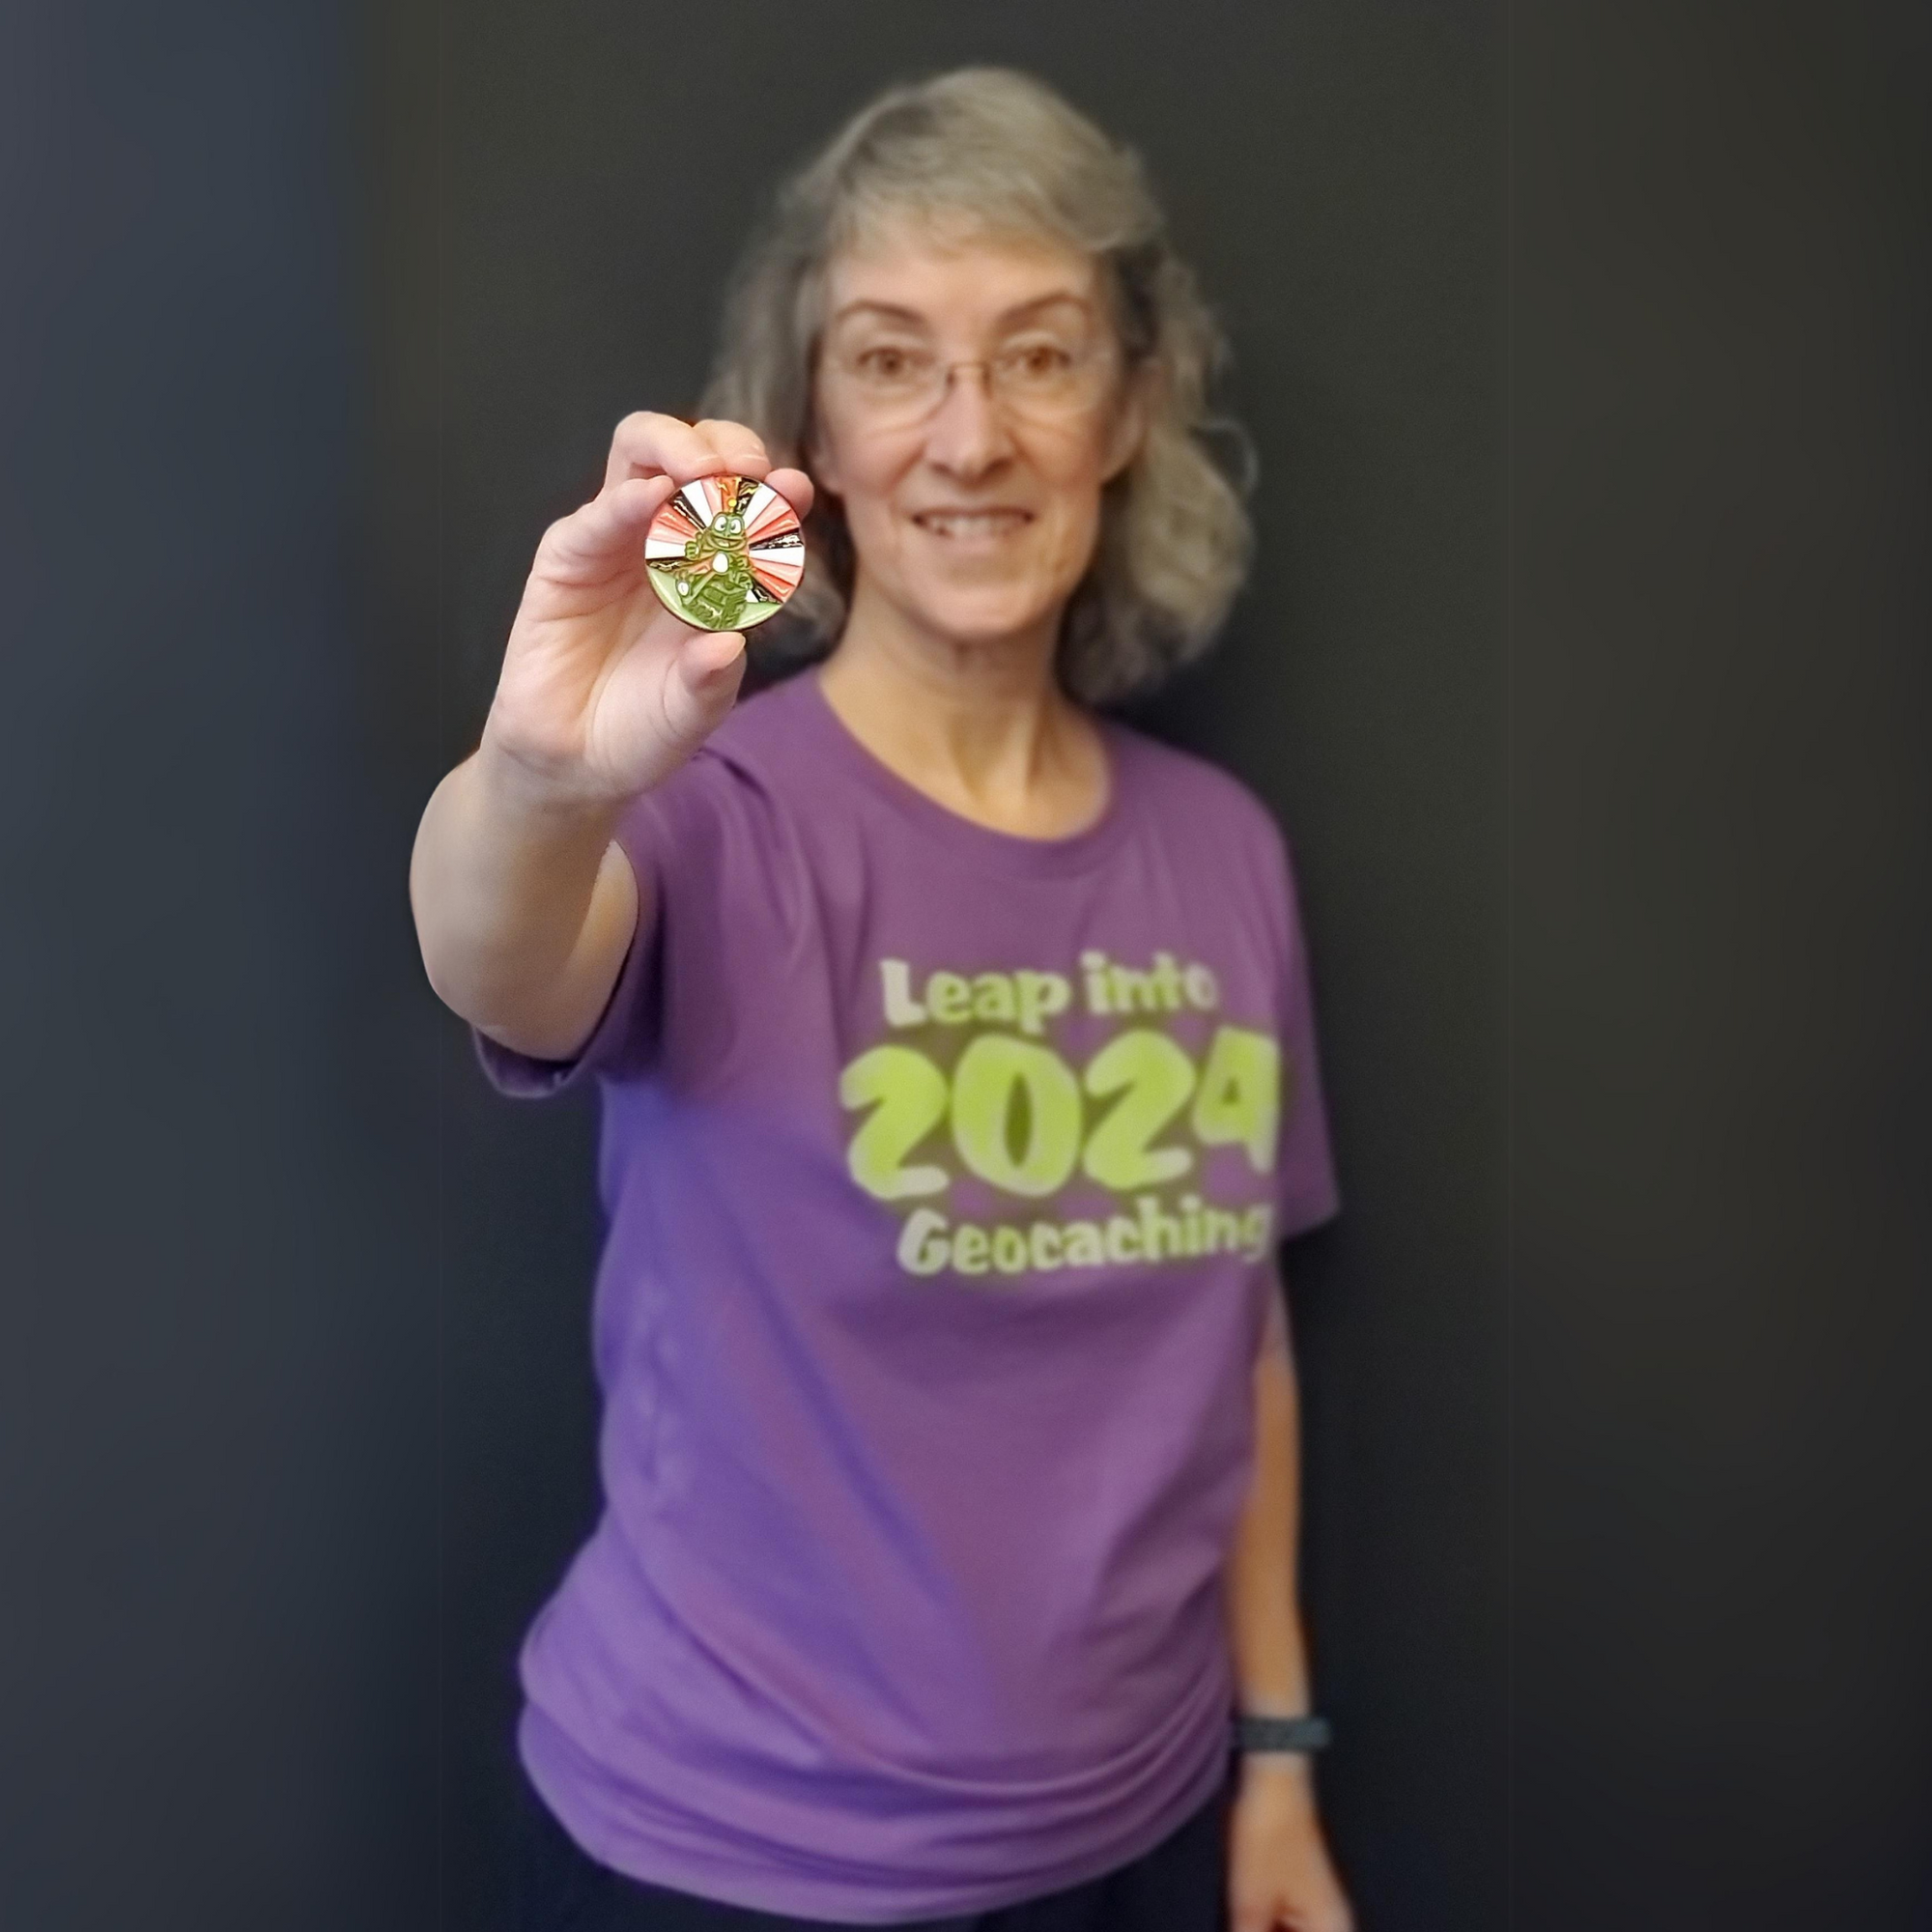 Leap Into Geocaching 2024 T-Shirt + Geocoin + Tag